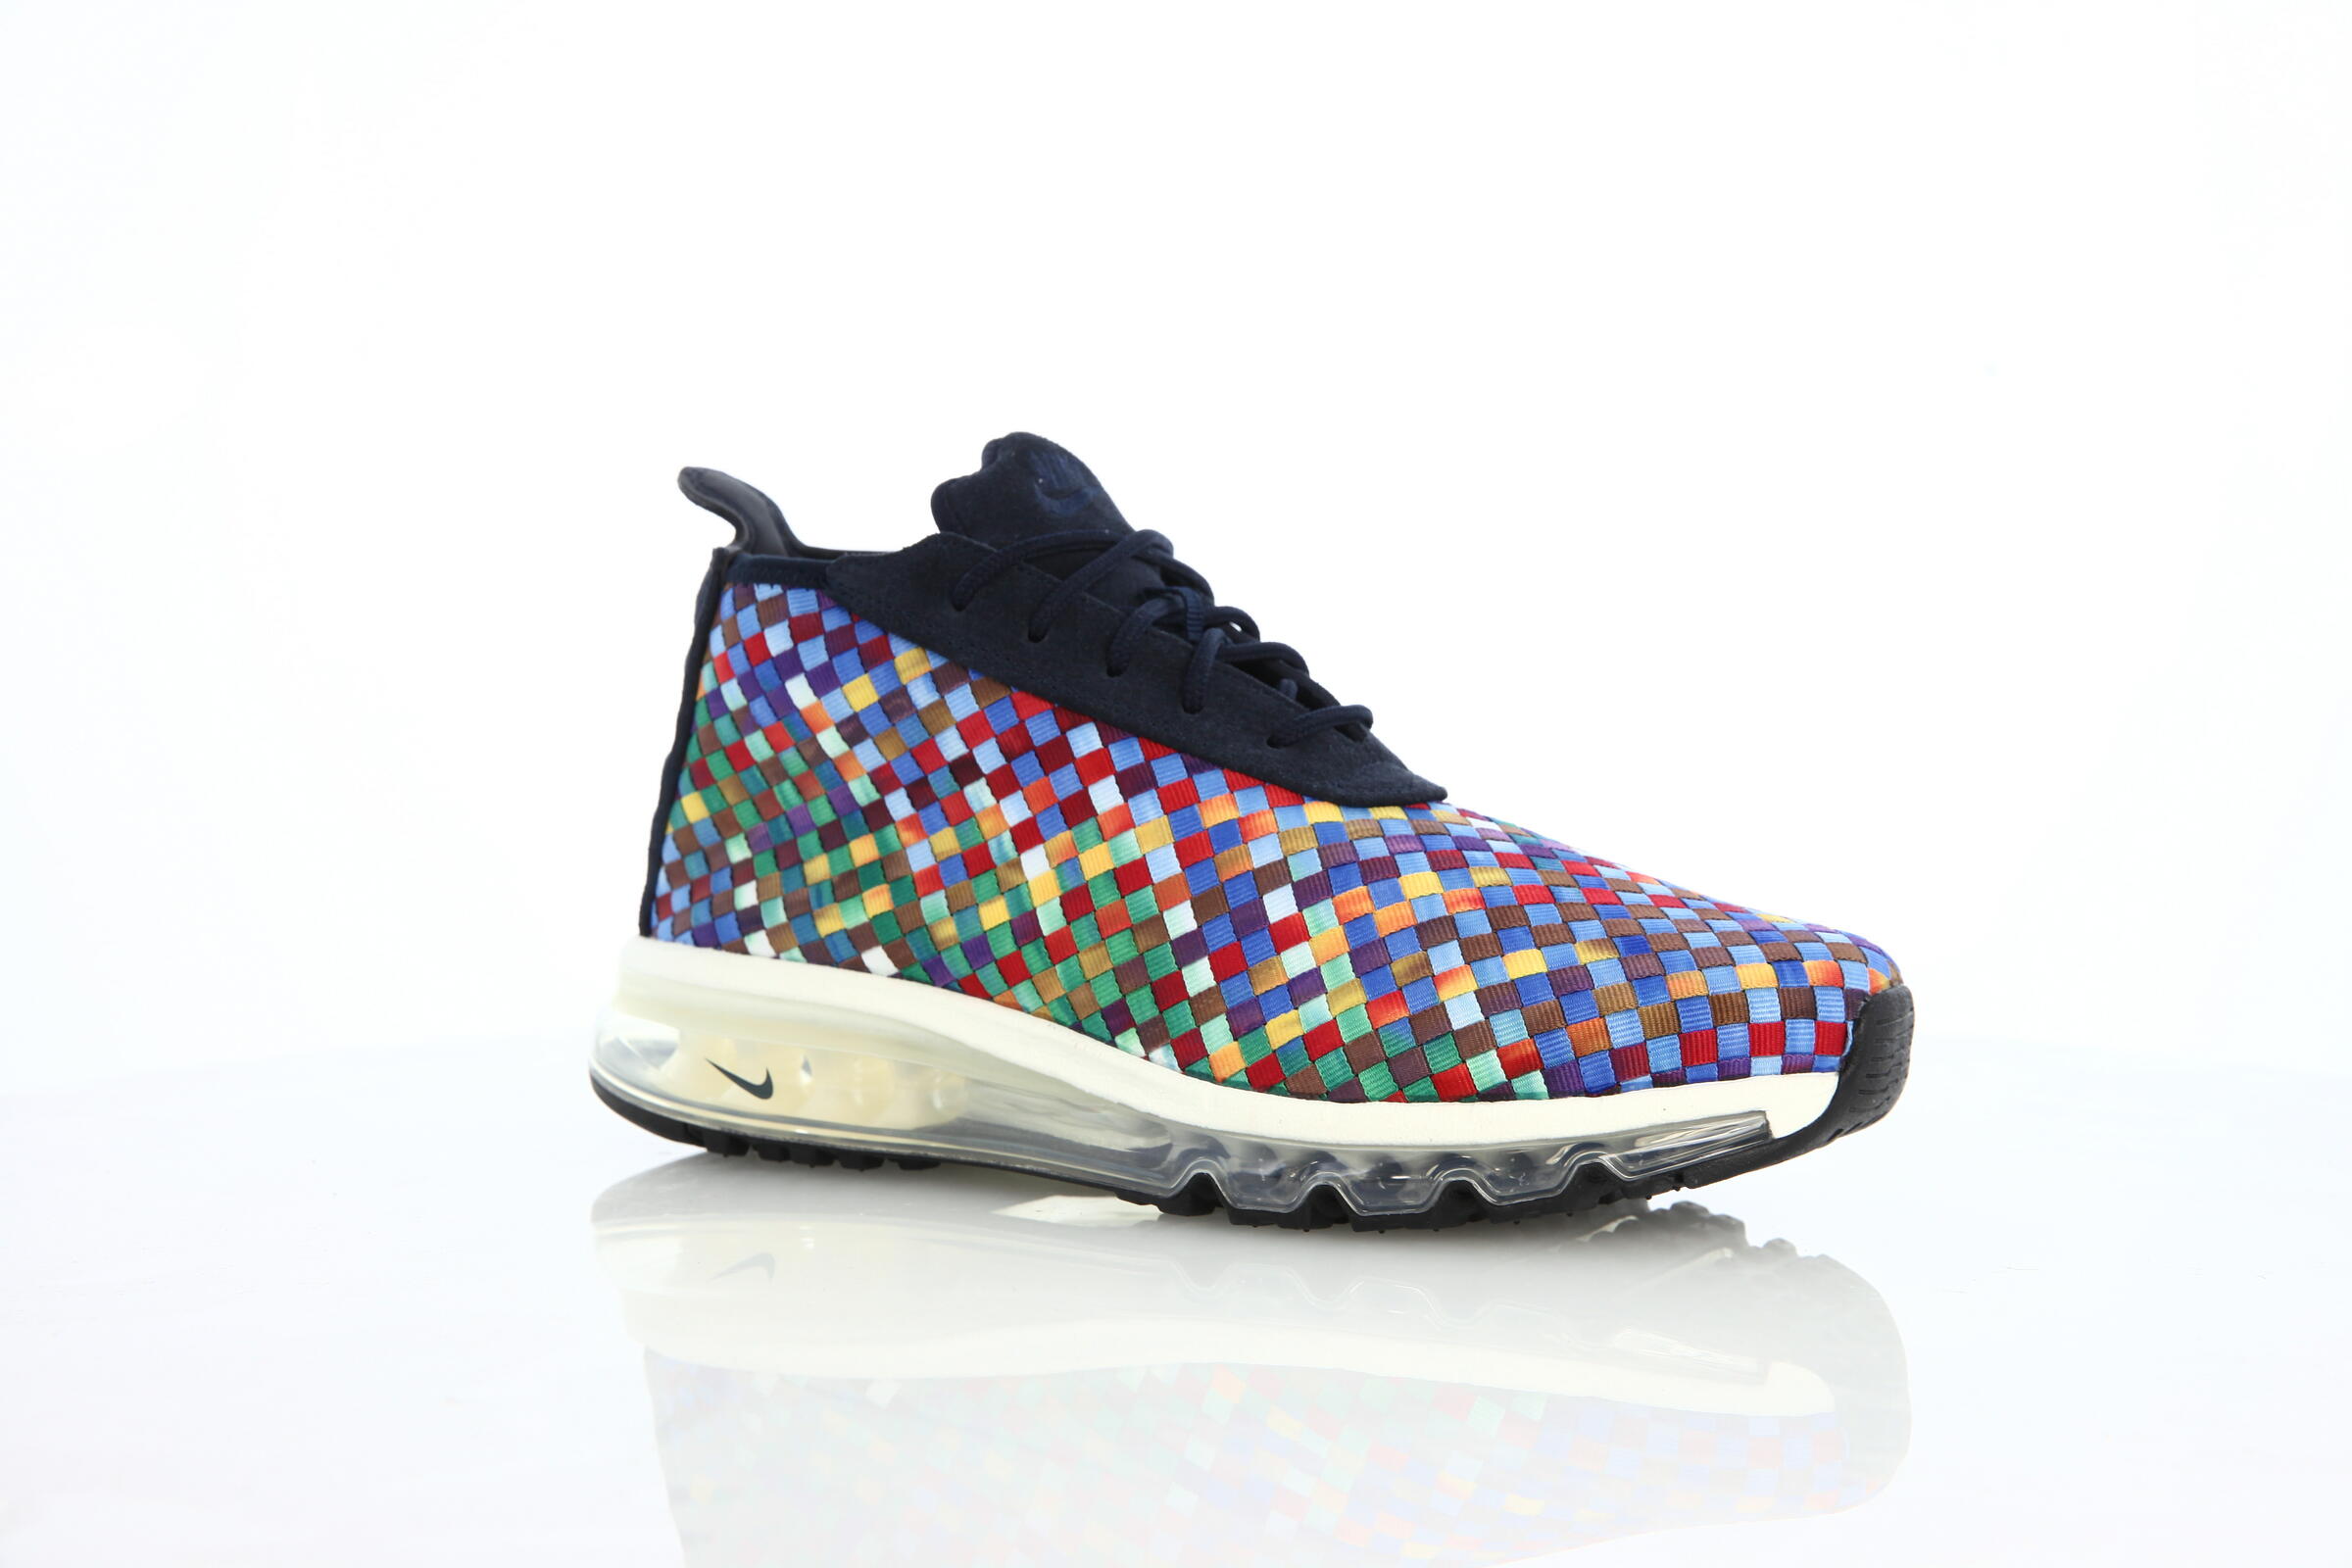 Nike Air Max Woven Boot "Multicolor"